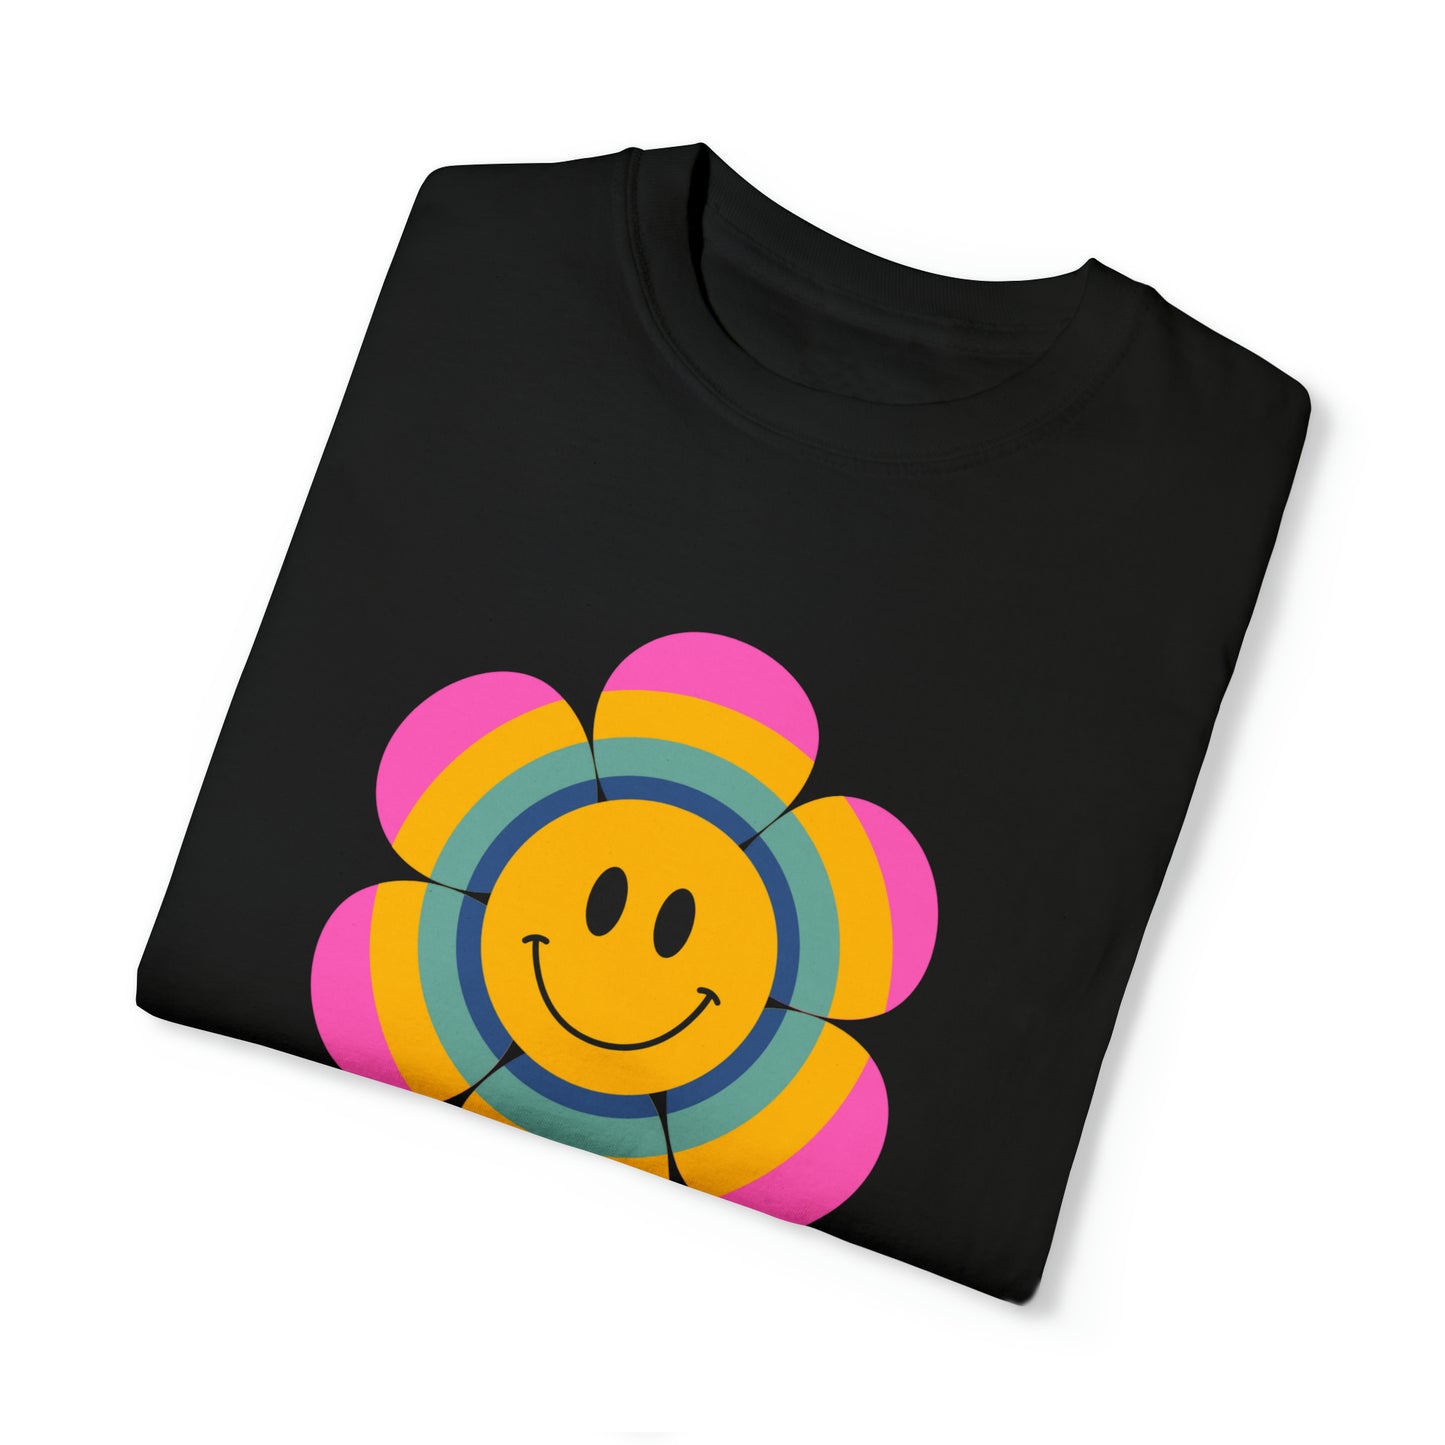 Smiling flower with "Have a great day” below it on this black only Unisex Garment-Dyed T-shirt. Spread some good cheer!